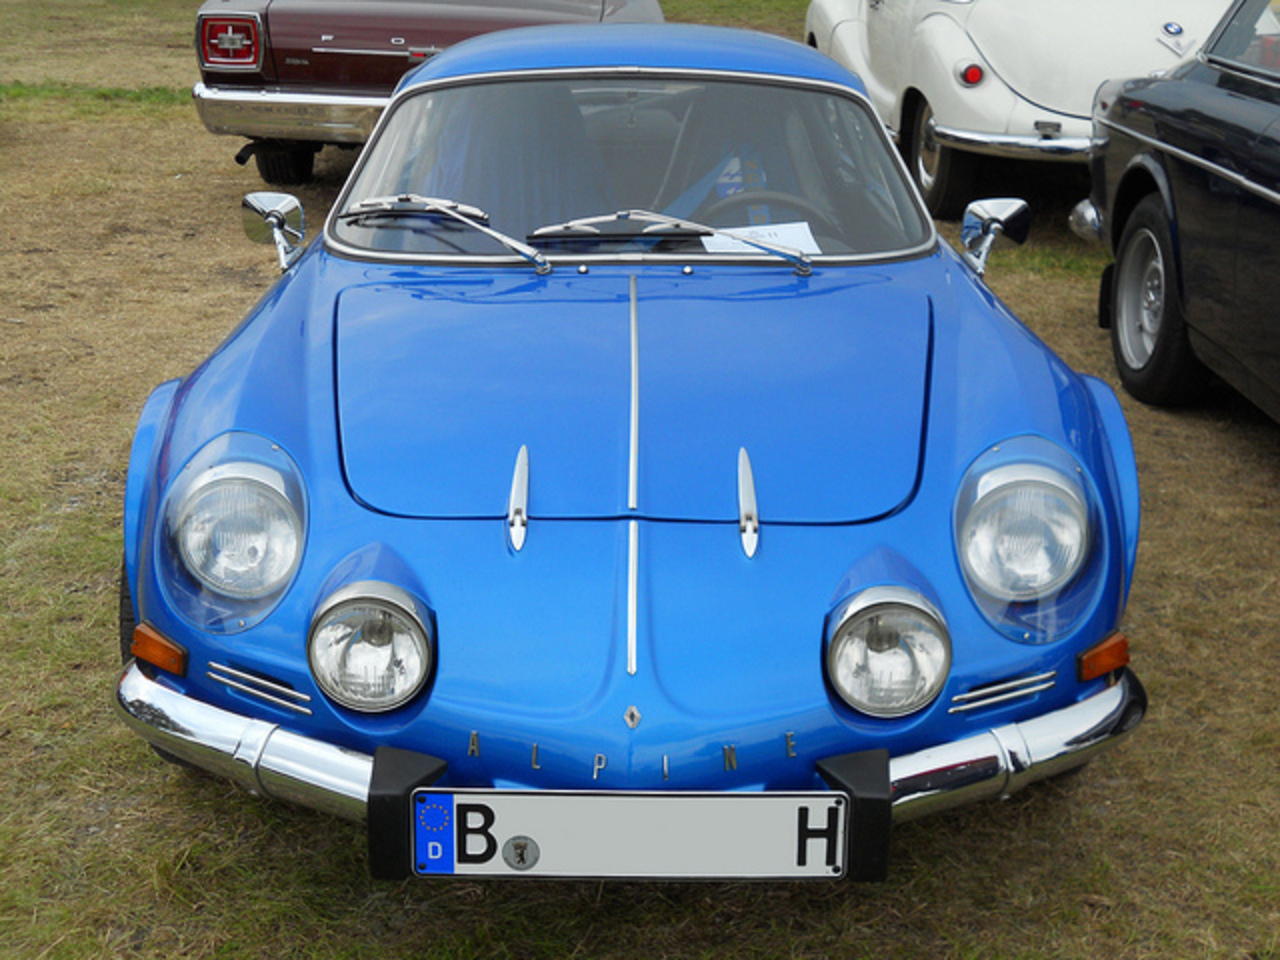 Alpine A110 1300 VC: Photo gallery, complete information about ...